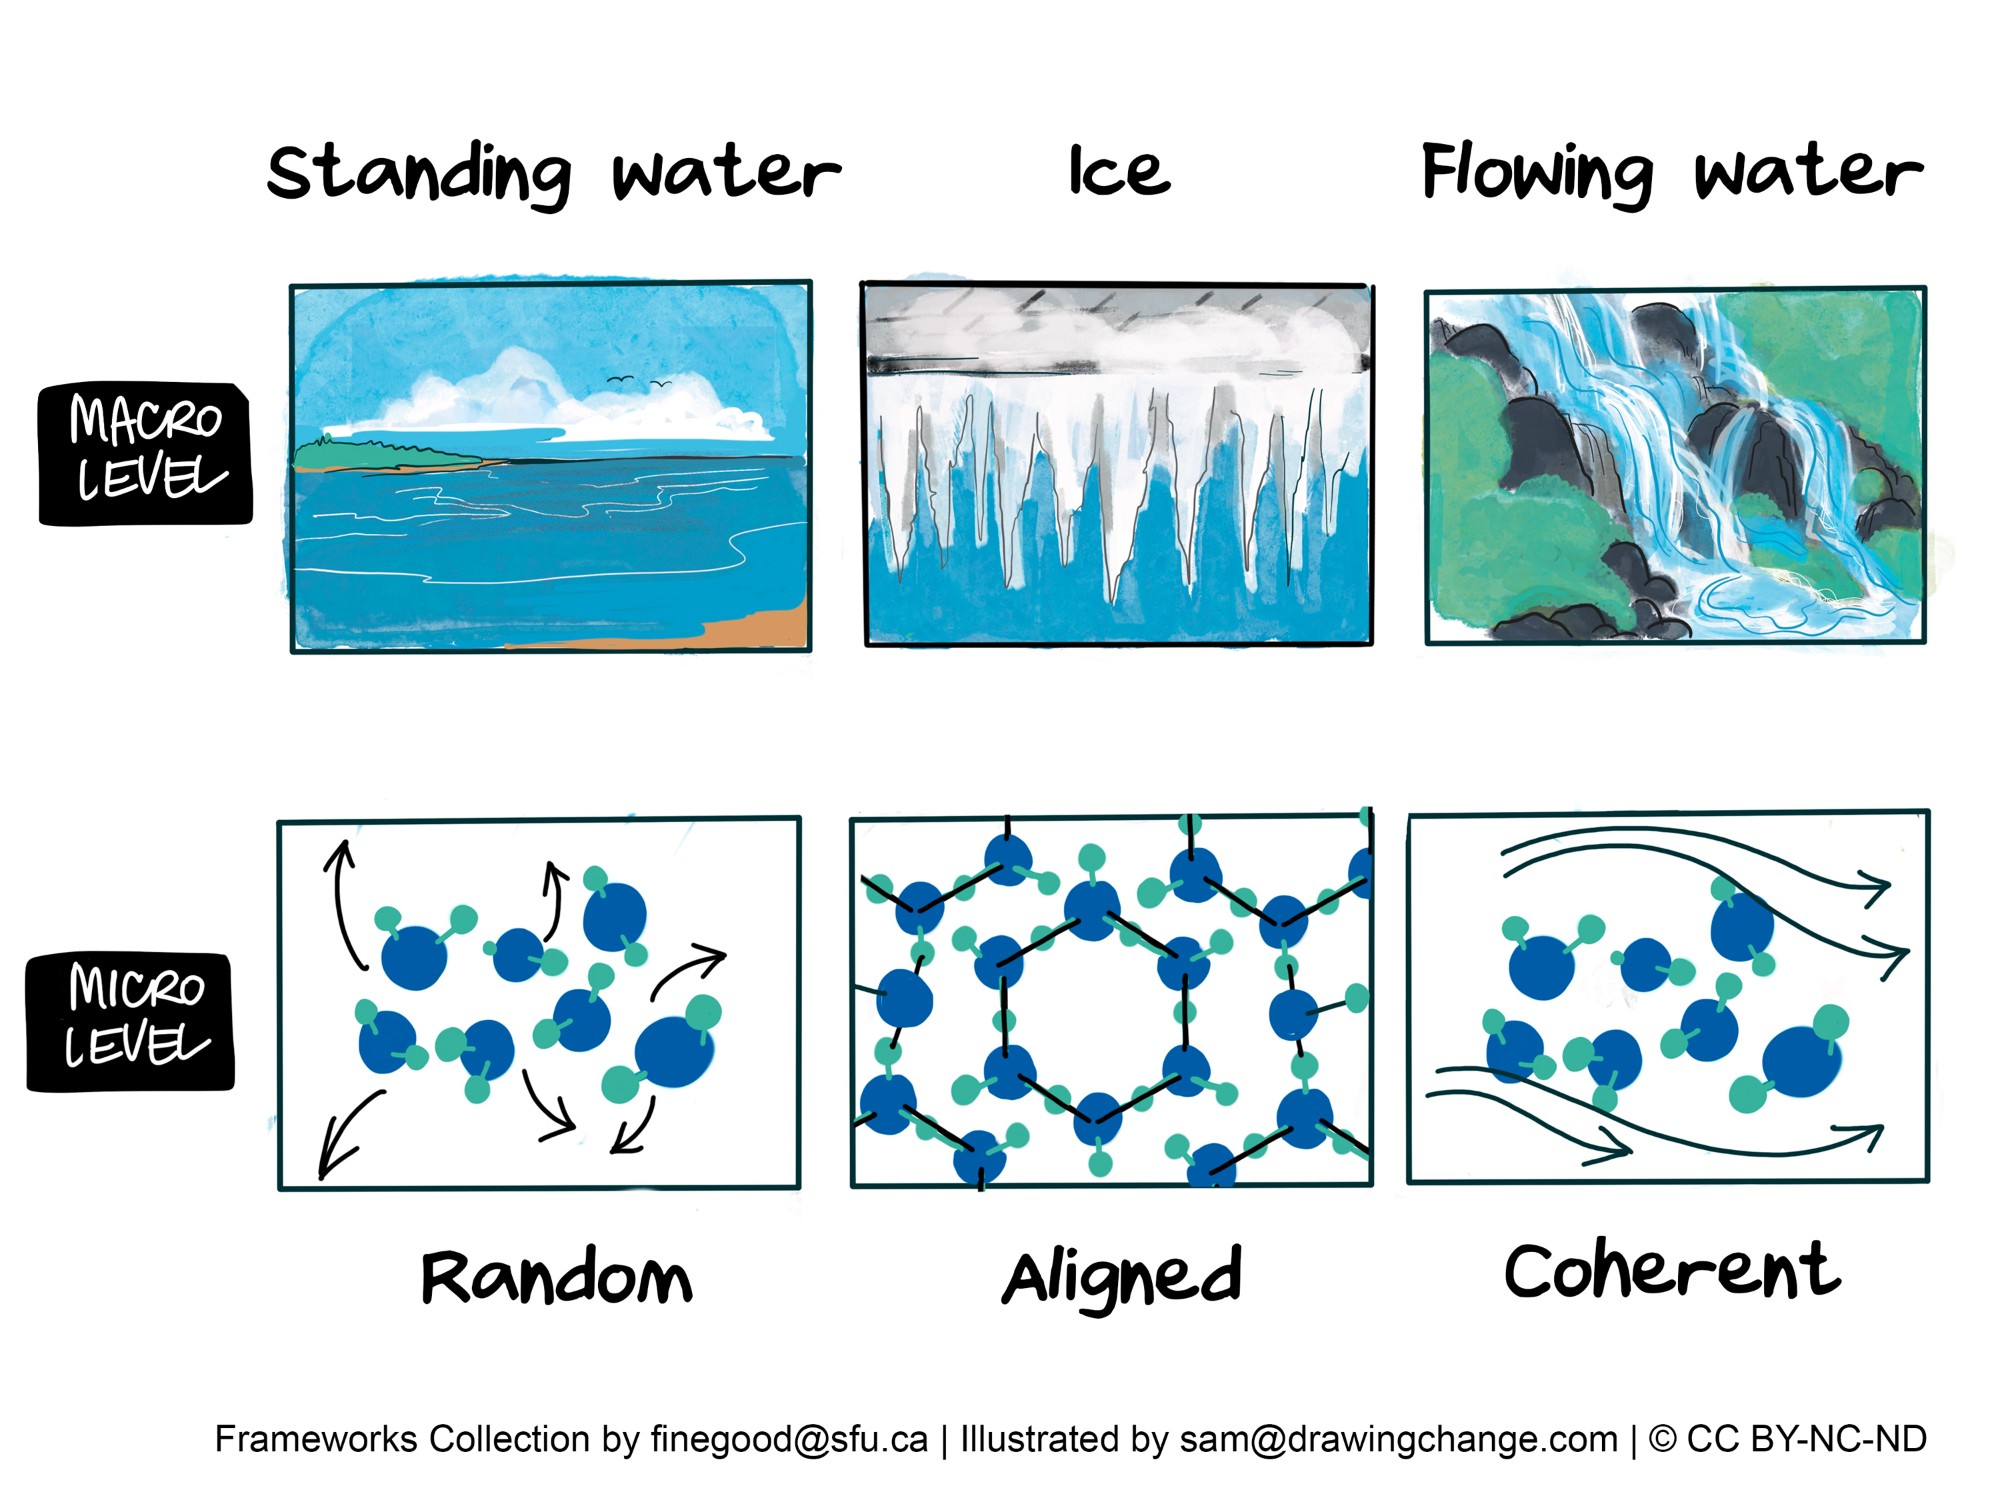 This image presents a visual metaphor for organization and movement at macro and micro levels, using the states and behavior of water.  At the macro level, illustrated on the top row, there are three panels: "Standing water" depicts a calm lake with a mountain in the background, representing stillness or lack of movement. "Ice" shows icicles hanging from a ledge, symbolizing a frozen state, structured and static. "Flowing water" illustrates a dynamic waterfall amidst rocks, indicating movement and change.  At the micro level, shown on the bottom row, there are three corresponding panels: "Random" displays a diagram of blue circles with arrows pointing in various directions, implying disorganization or lack of coordination. "Aligned" features blue circles connected by lines in a structured grid with arrows circling around, denoting order and regularity. "Coherent" portrays blue circles with arrows flowing in the same direction, suggesting unified movement towards a common direction or purpose.  The labels "MACRO LEVEL" and "MICRO LEVEL" are placed beside the relevant rows to differentiate the scales of observation.  The credits at the bottom read: "Frameworks Collection by finegood@sfu.ca | Illustrated by sam@drawingchange.com | © CC BY-NC-ND".